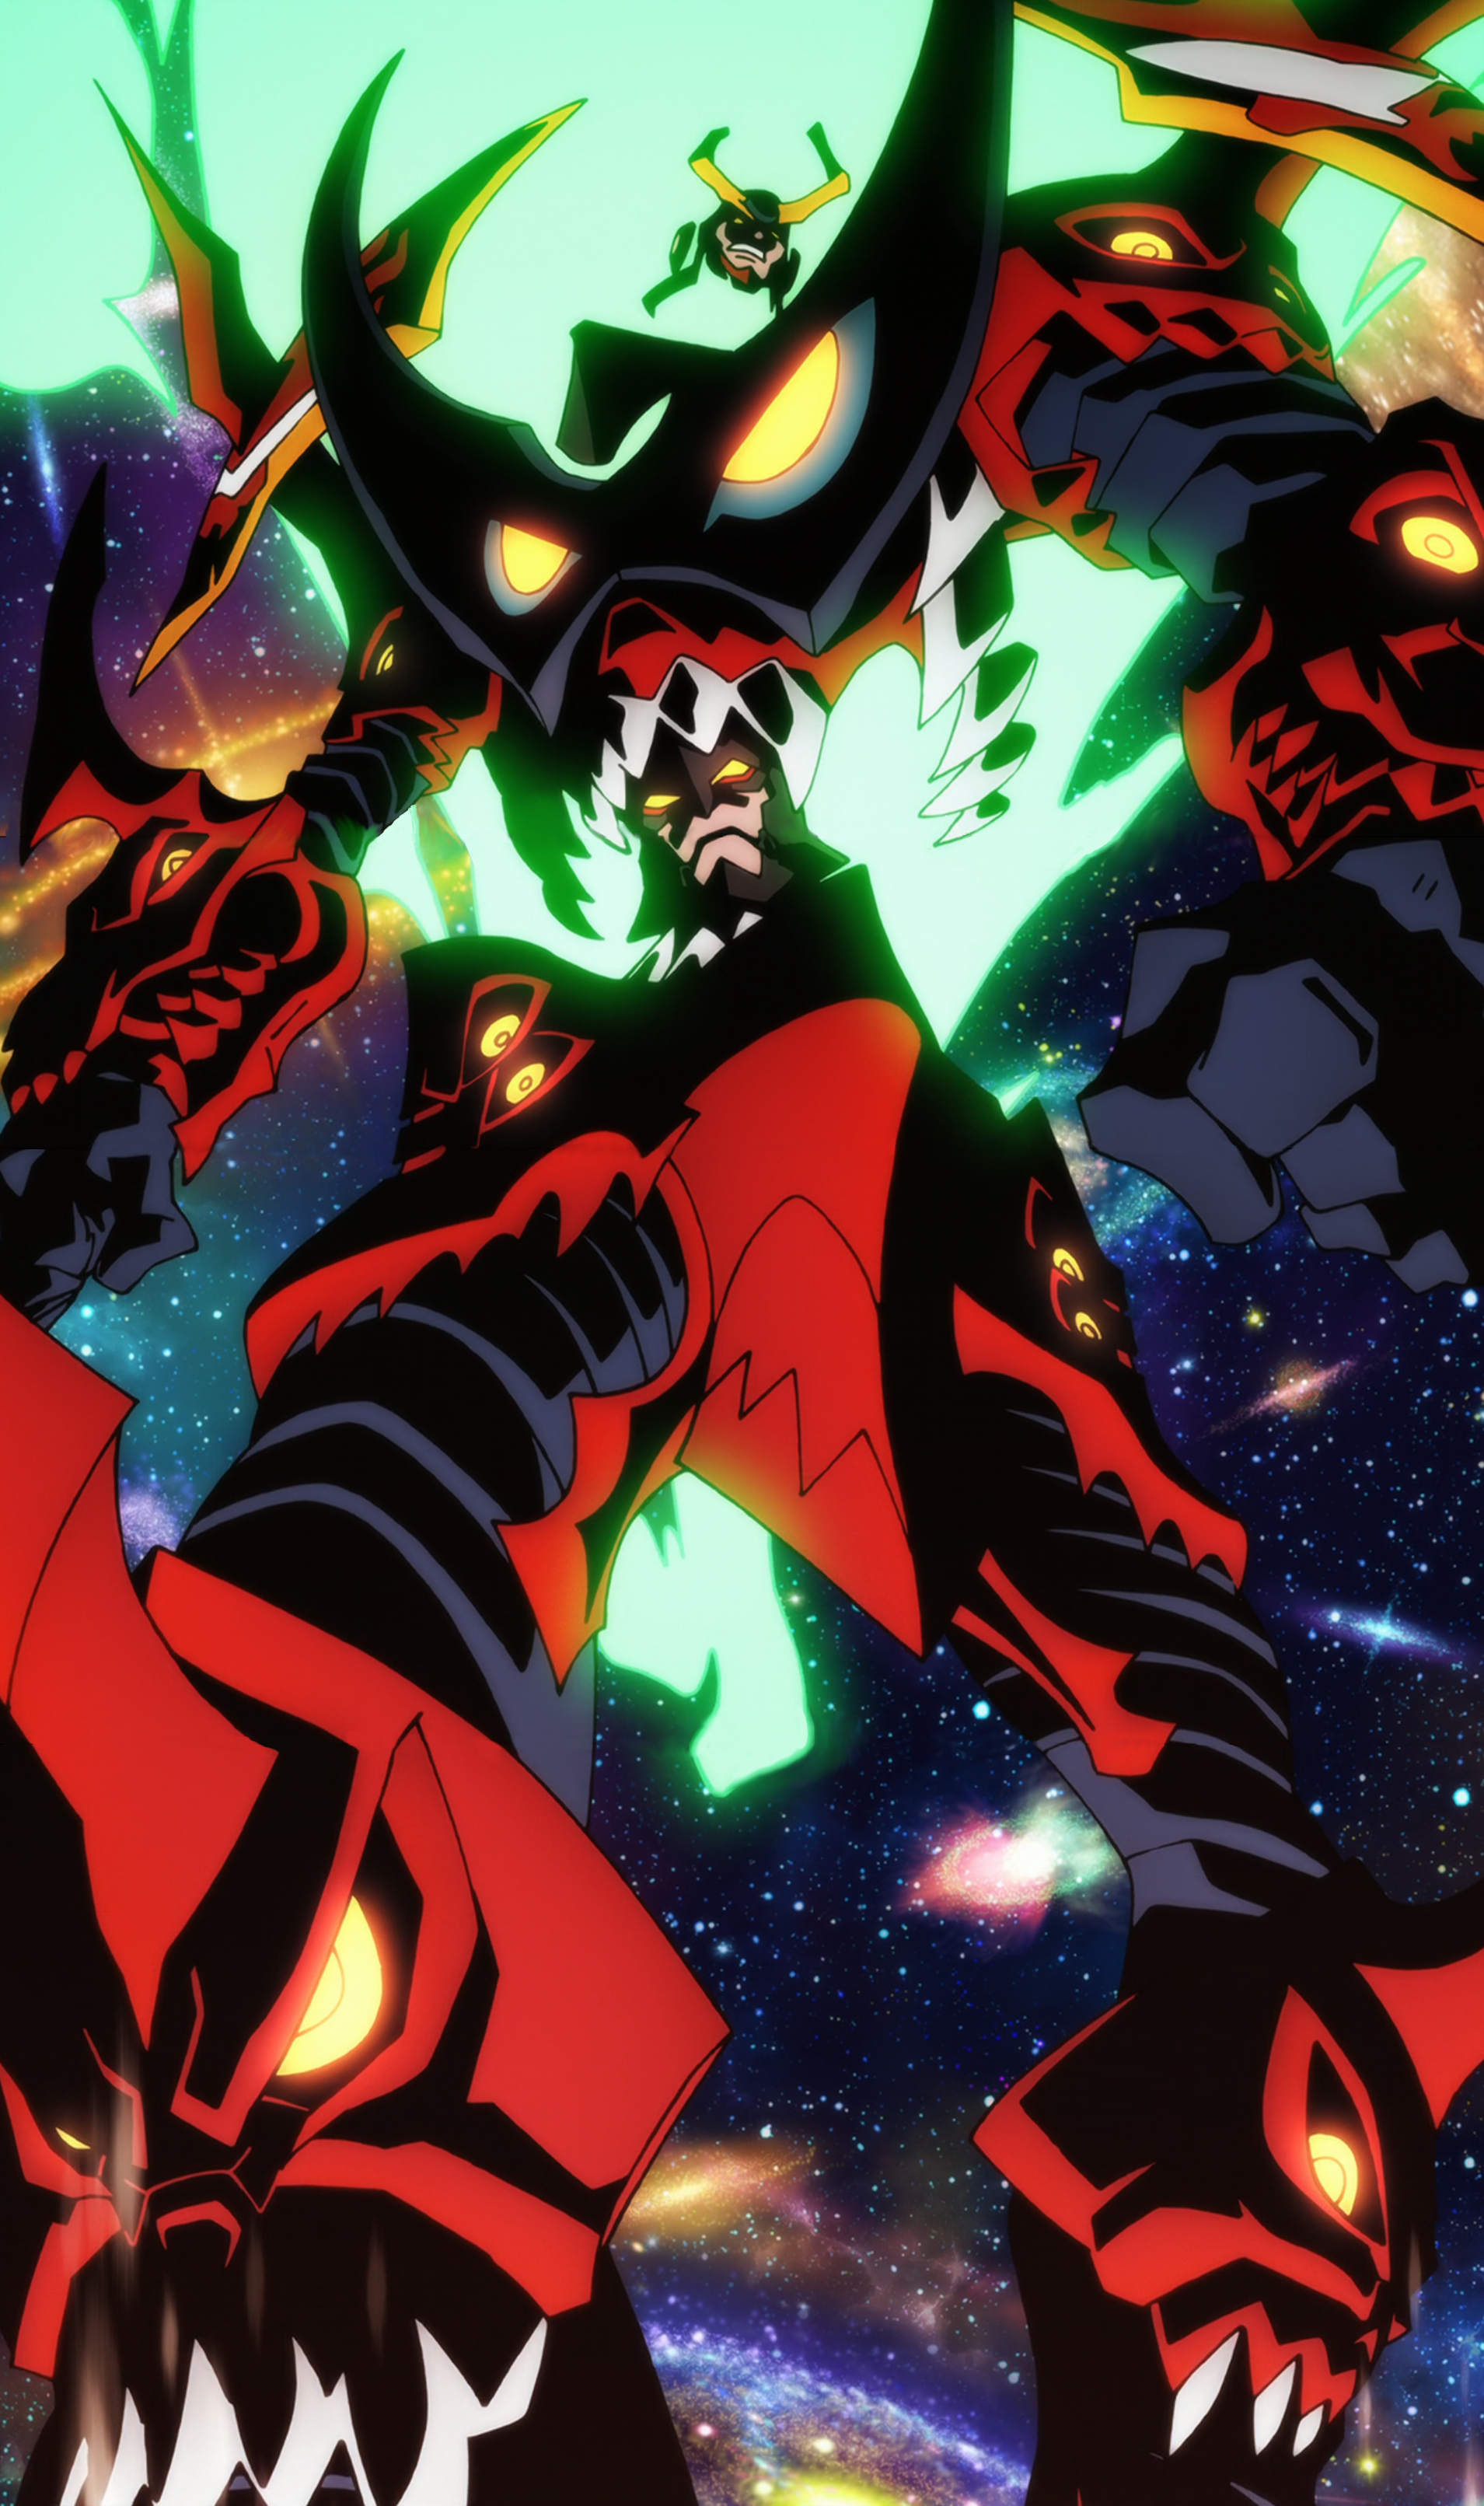 Gurren Lagann Movies Getting 4K Ultra HD BD, Theatrical Re-release for 15th  Anniversary